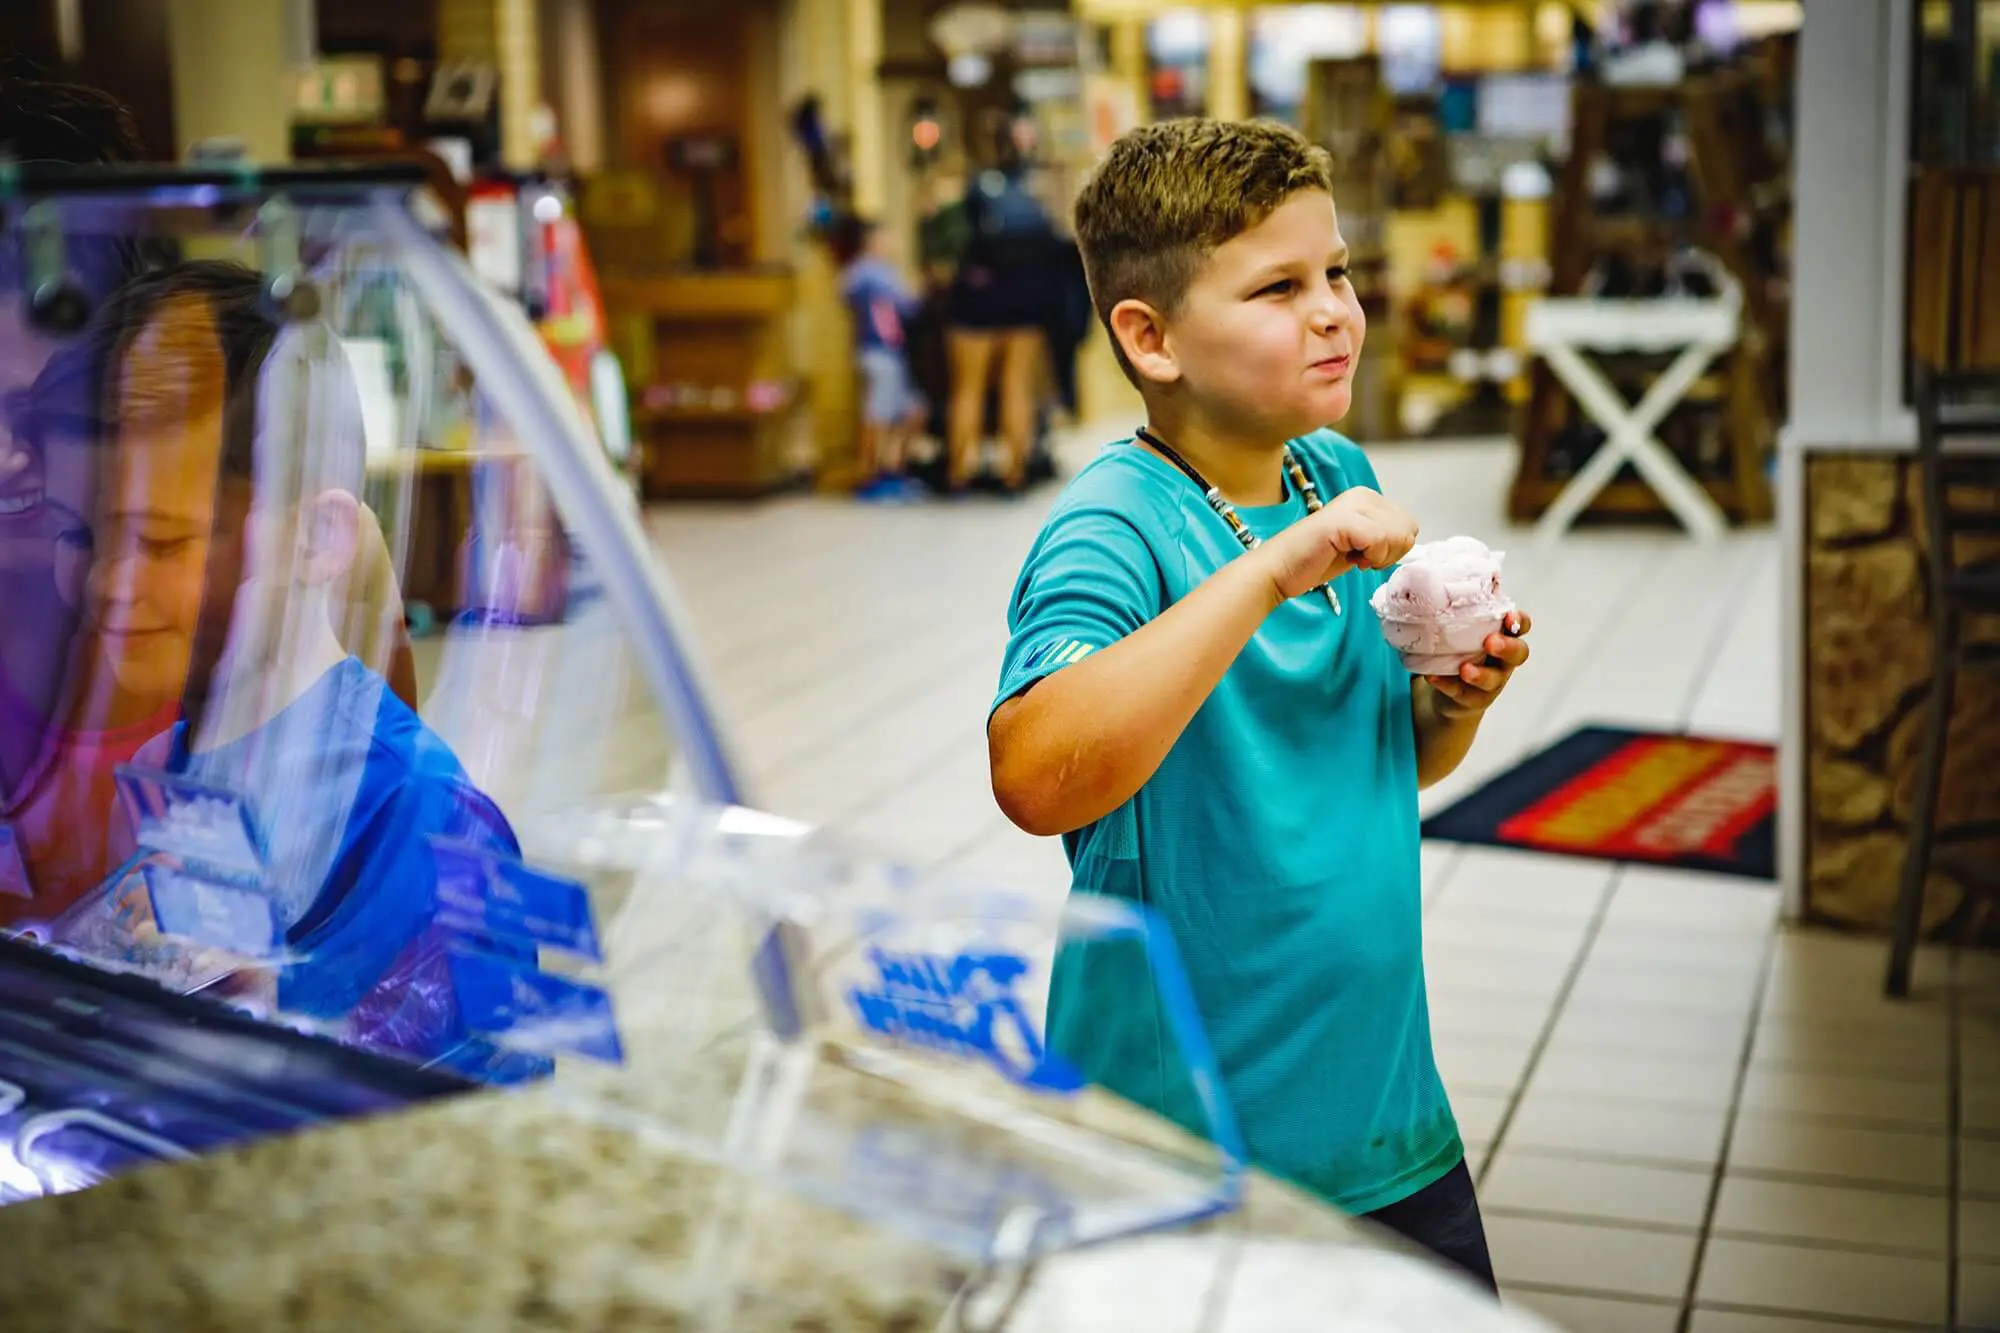 Young boy eating a bowl of ice cream at the Meramec Caverns candy shop